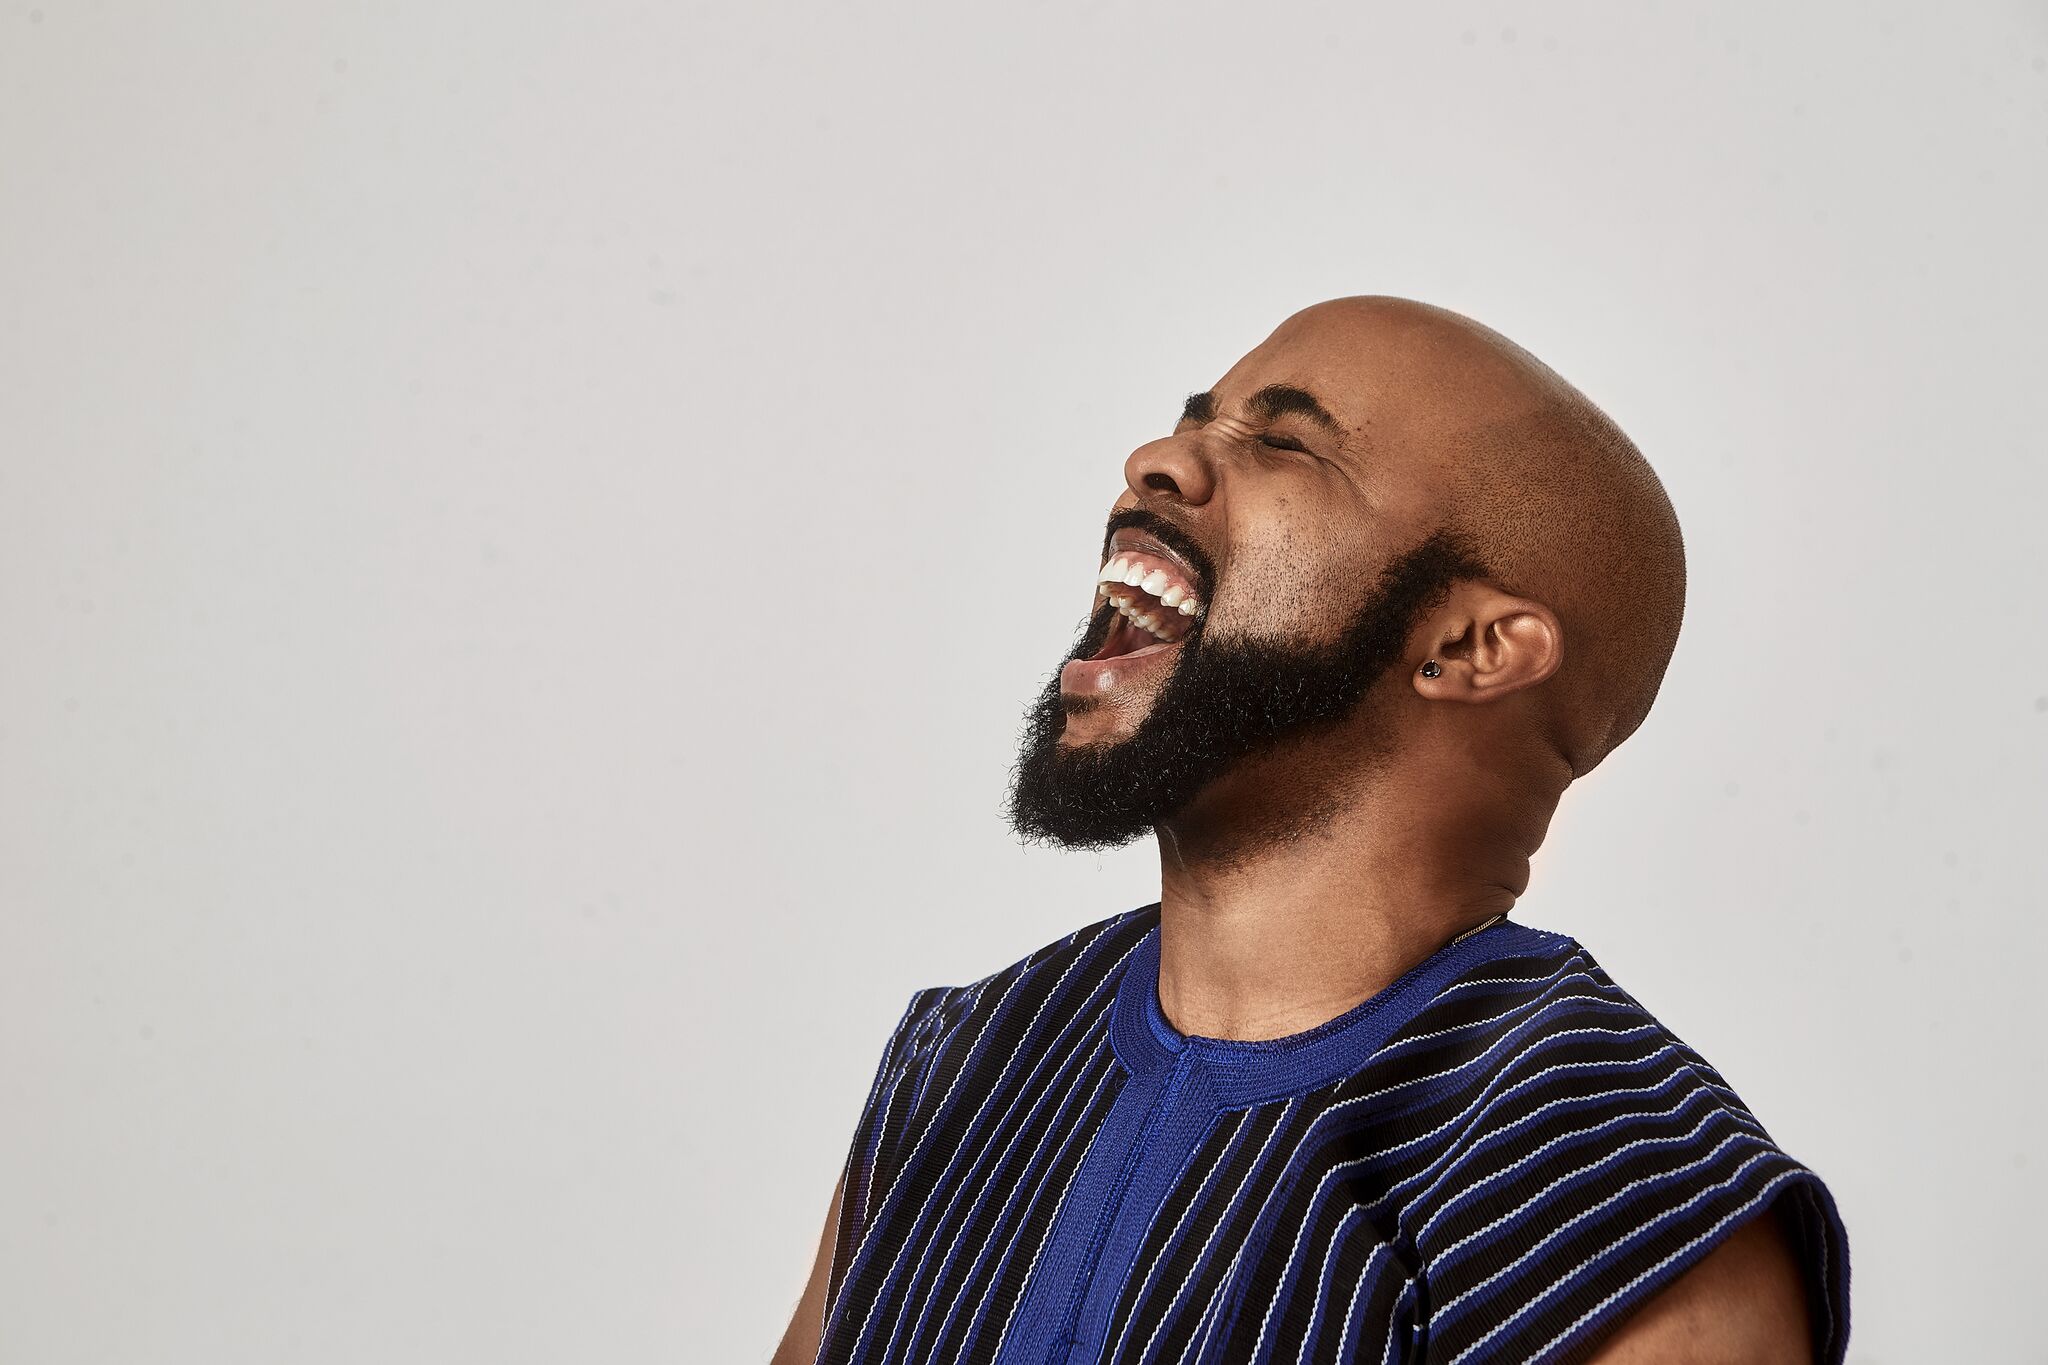 Banky W breaks silence after election loss with uplifting video - 'Faith after a Fall'